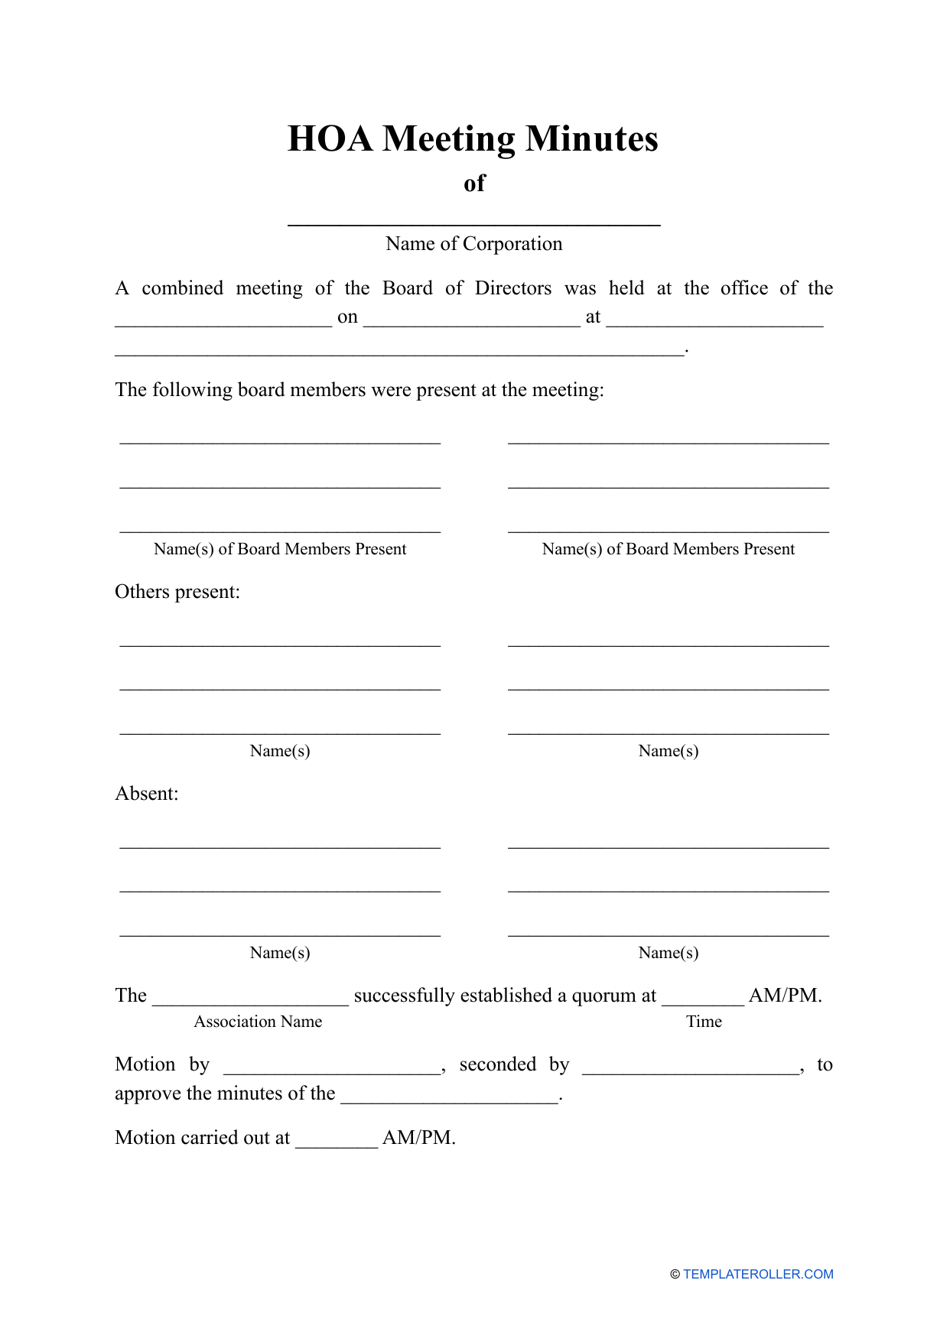 Hoa Meeting Minutes Template Fill Out, Sign Online and Download PDF